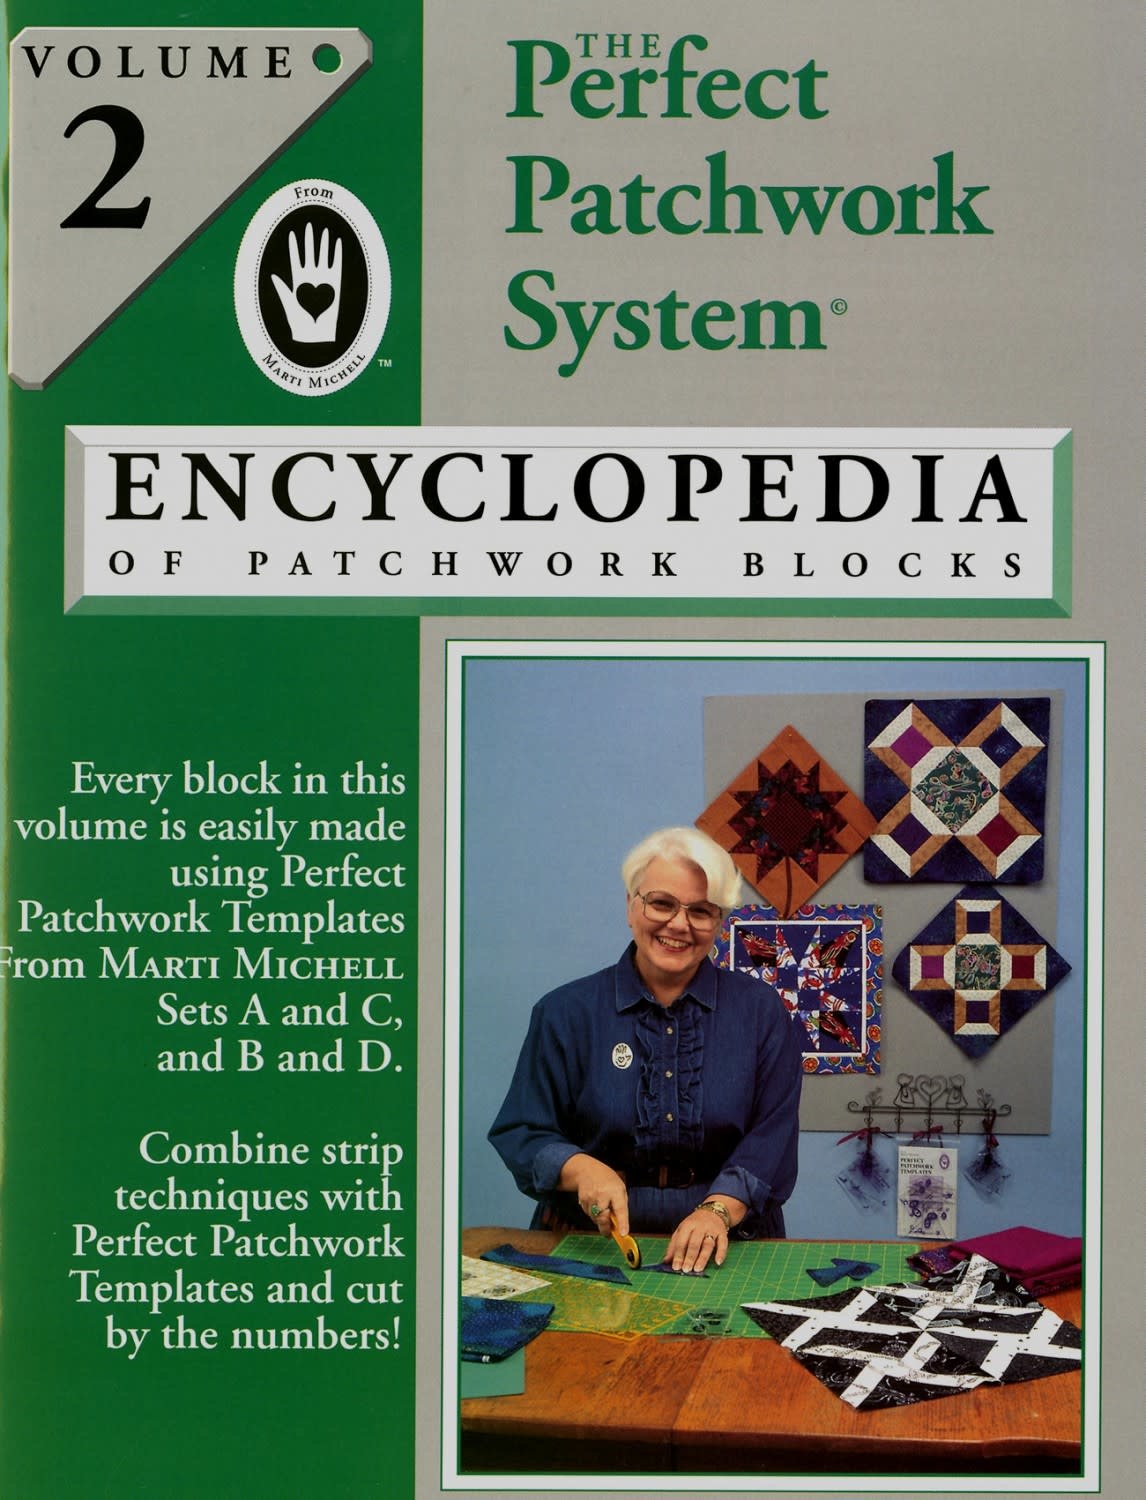 Perfect Patchwork Templates – From Marti Michell